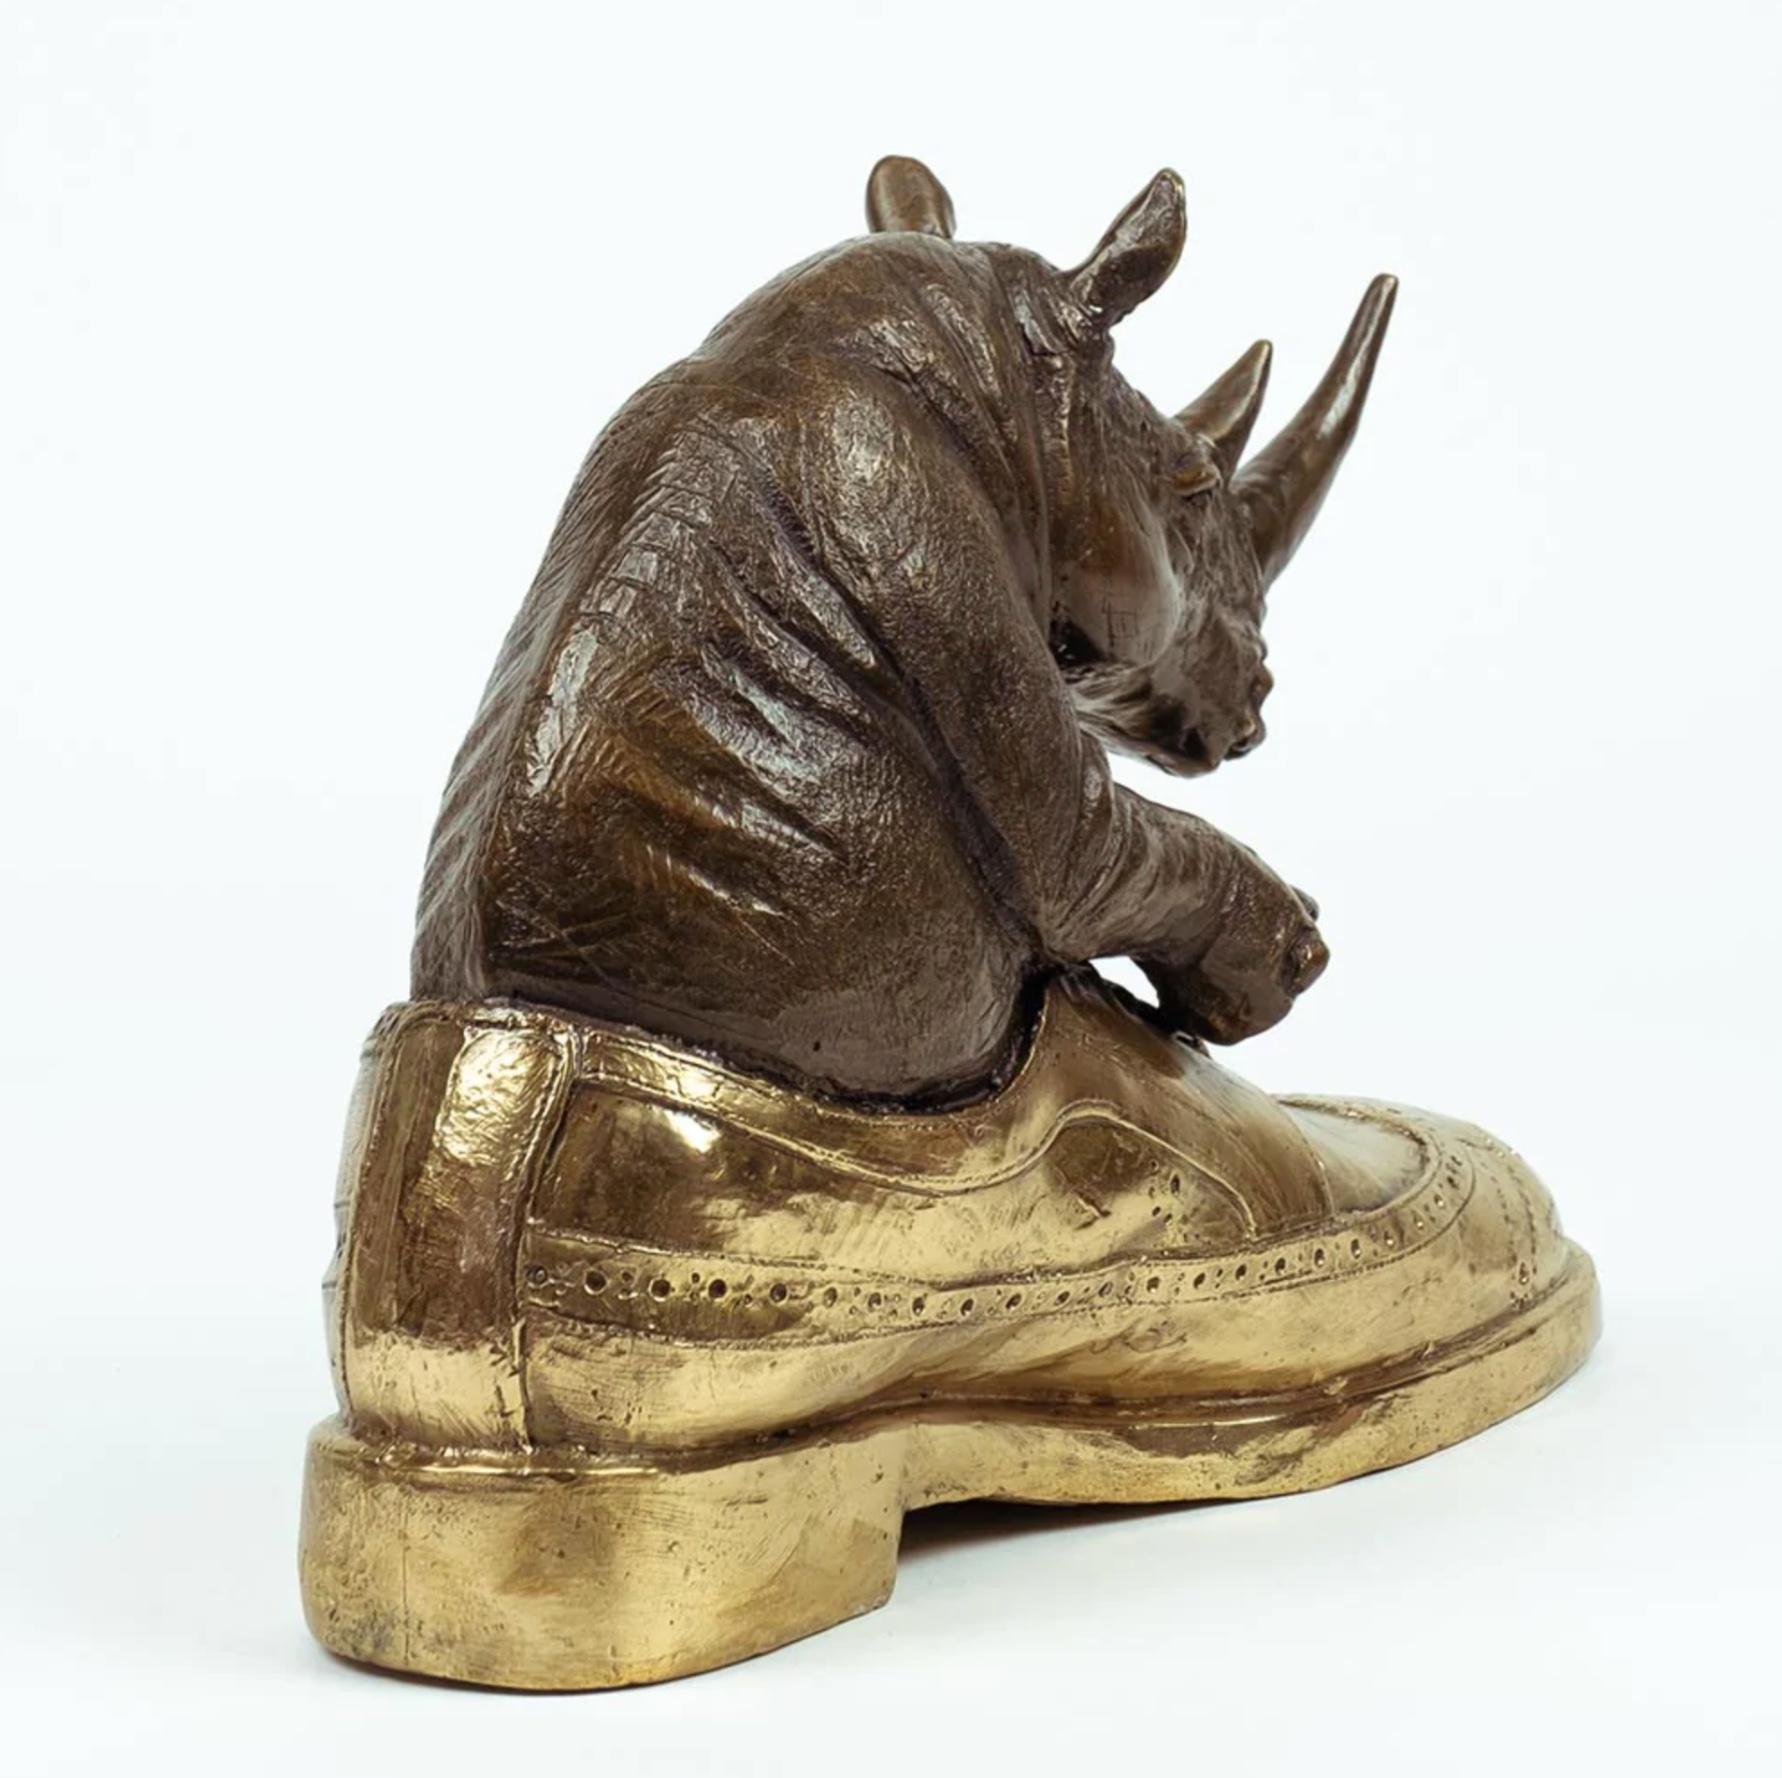 Title: Walk with the rhino
Authentic bronze sculpture

This authentic bronze sculpture titled 'Walk with the rhino' by artists Gillie and Marc has been meticulously crafted in bronze. It features a a rhino sitting in a shoe and comes in a